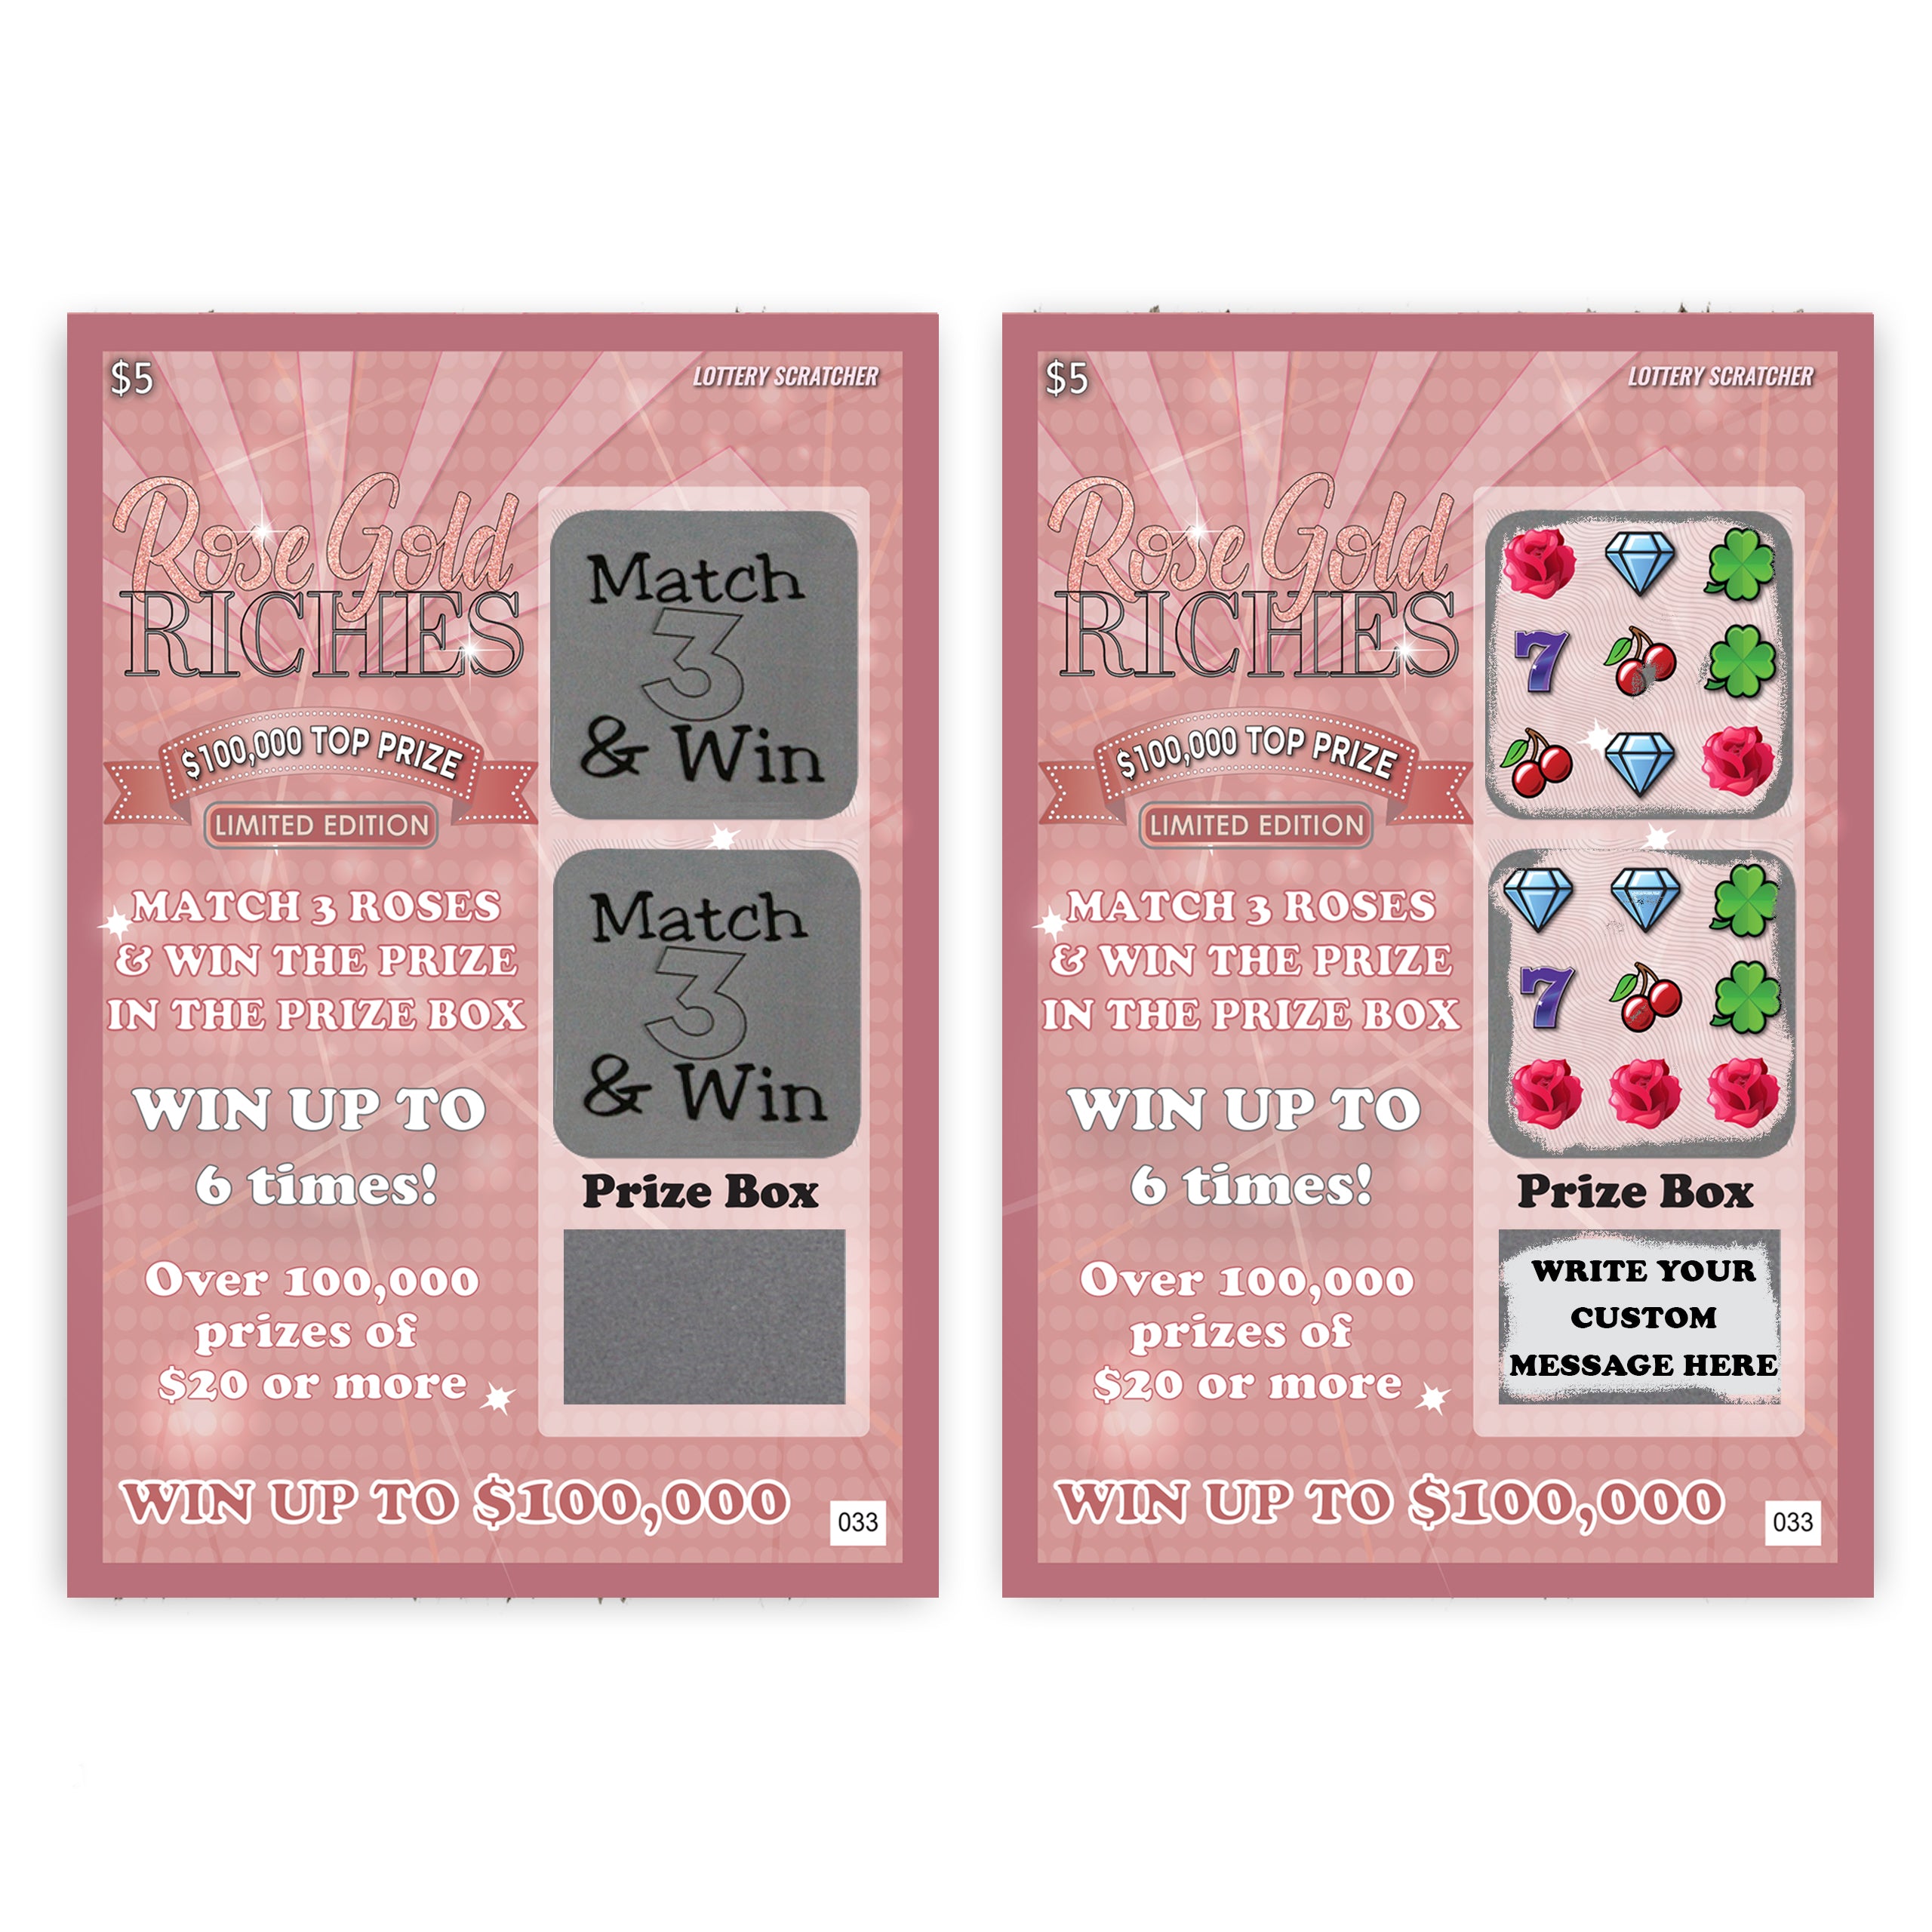 CUSTOM Holiday Valentine's Day/Prom Rose Gold Riches Lotto Replica Scratch Off Card 4" x 6"